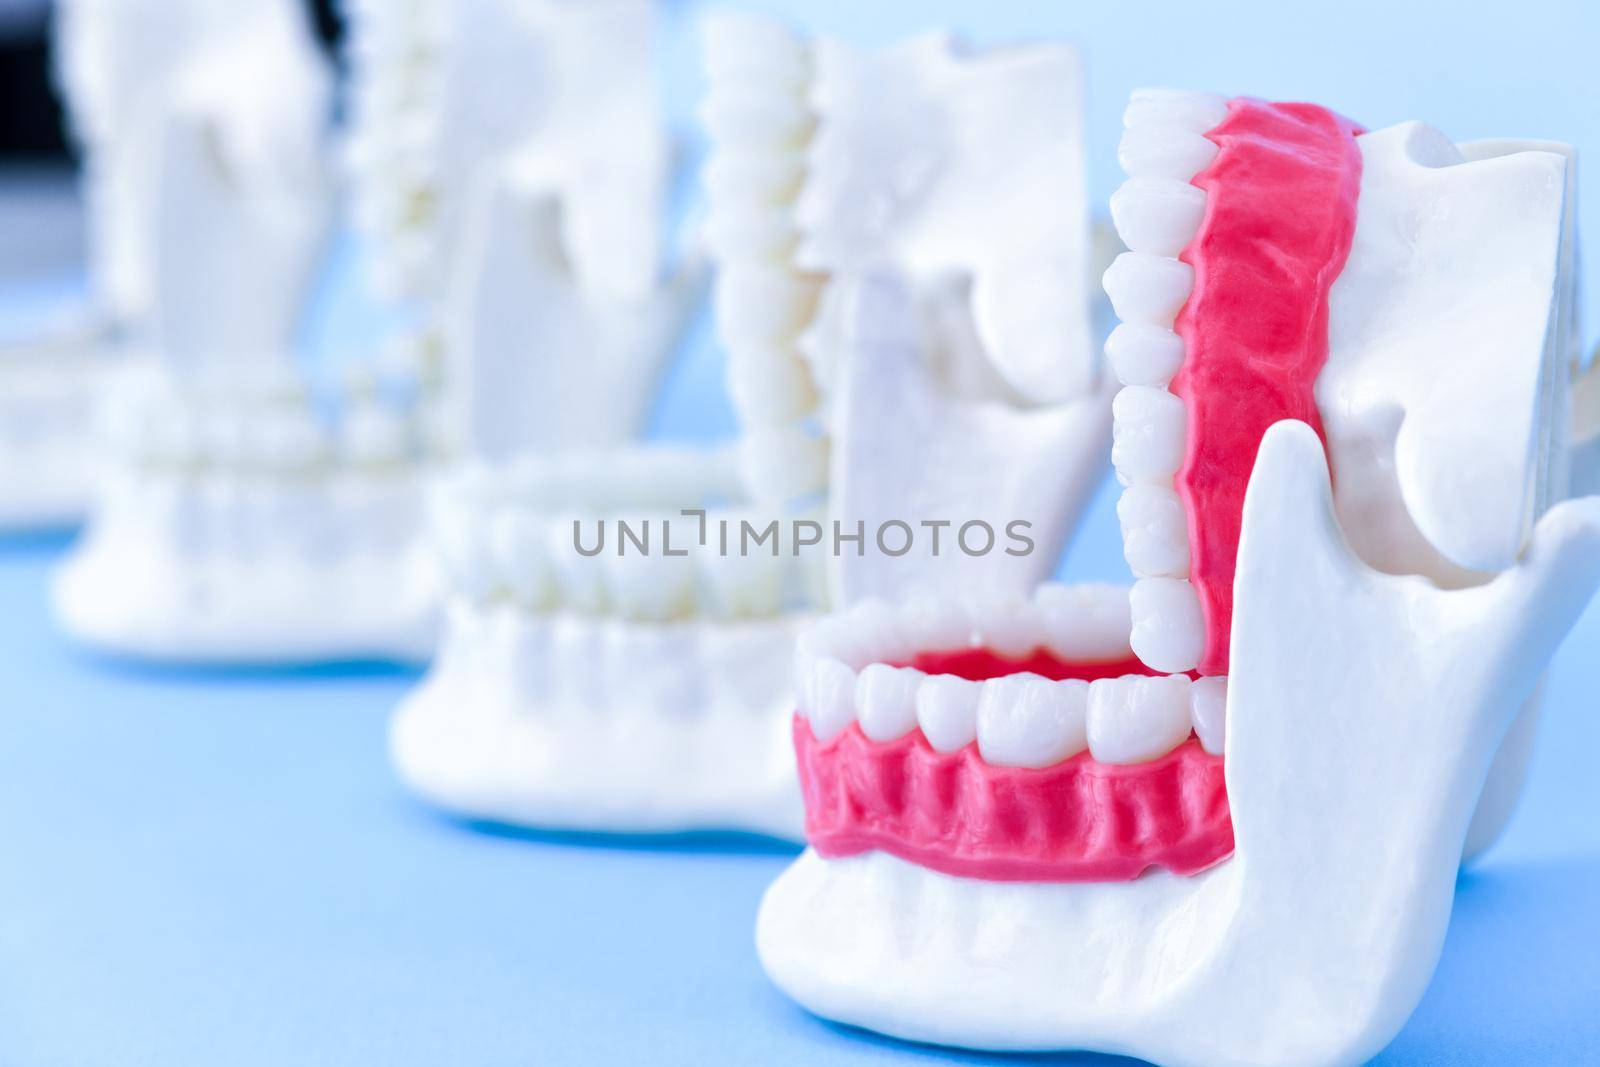 Dentist orthodontic teeth models with jaws opened on blue background